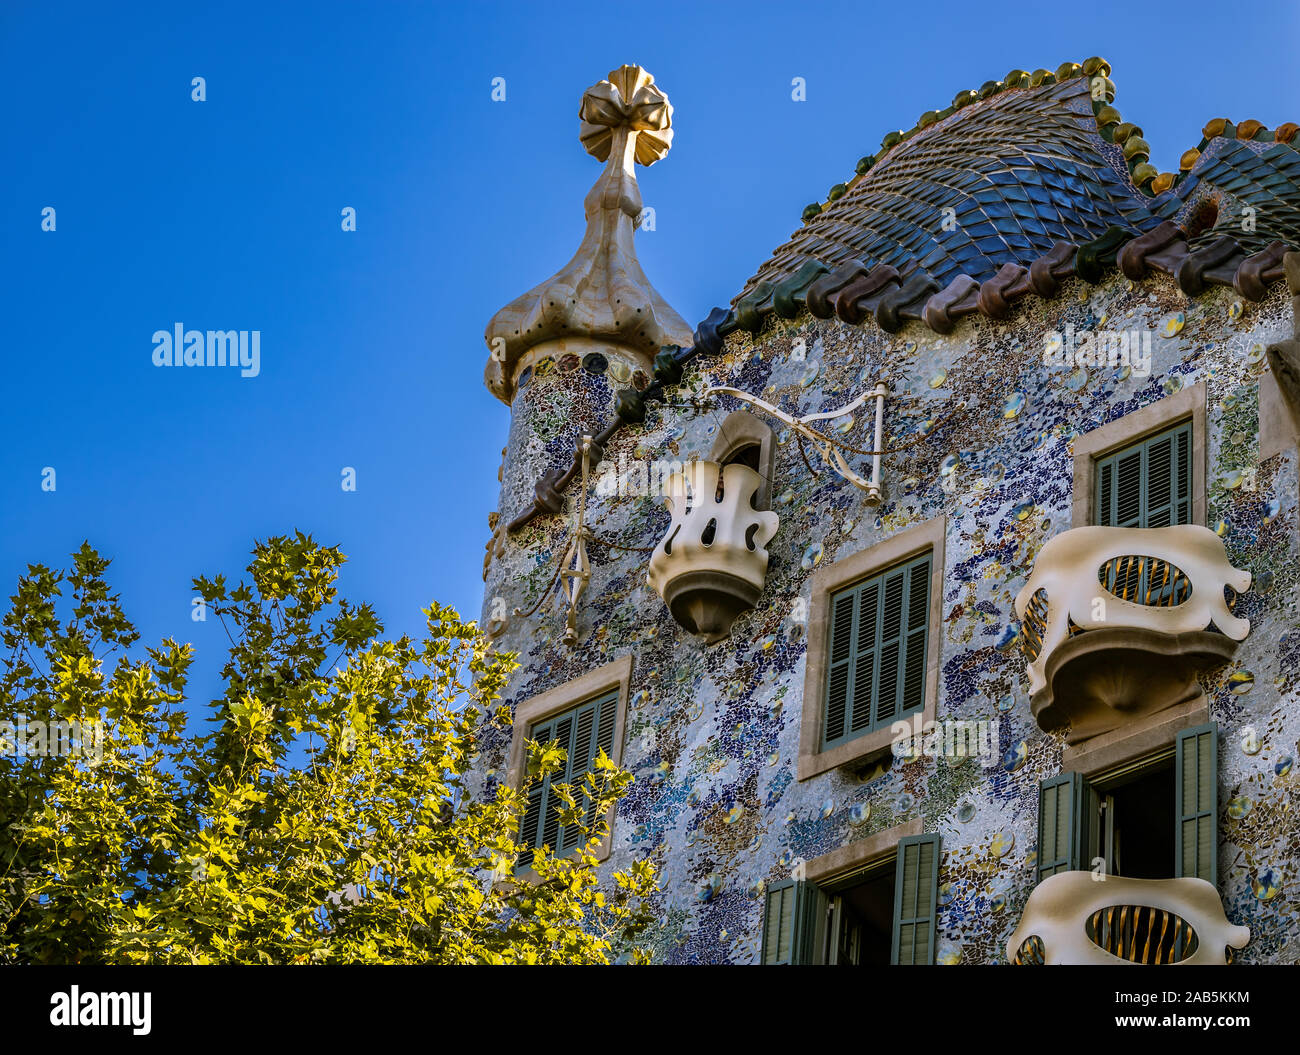 BARCELONA, SPAIN - AUGUST 24, 2019: Casa Batlló is a work designed by the famous Catalan architect Antoni Gaudi in 1904 and completed in 1907. Stock Photo